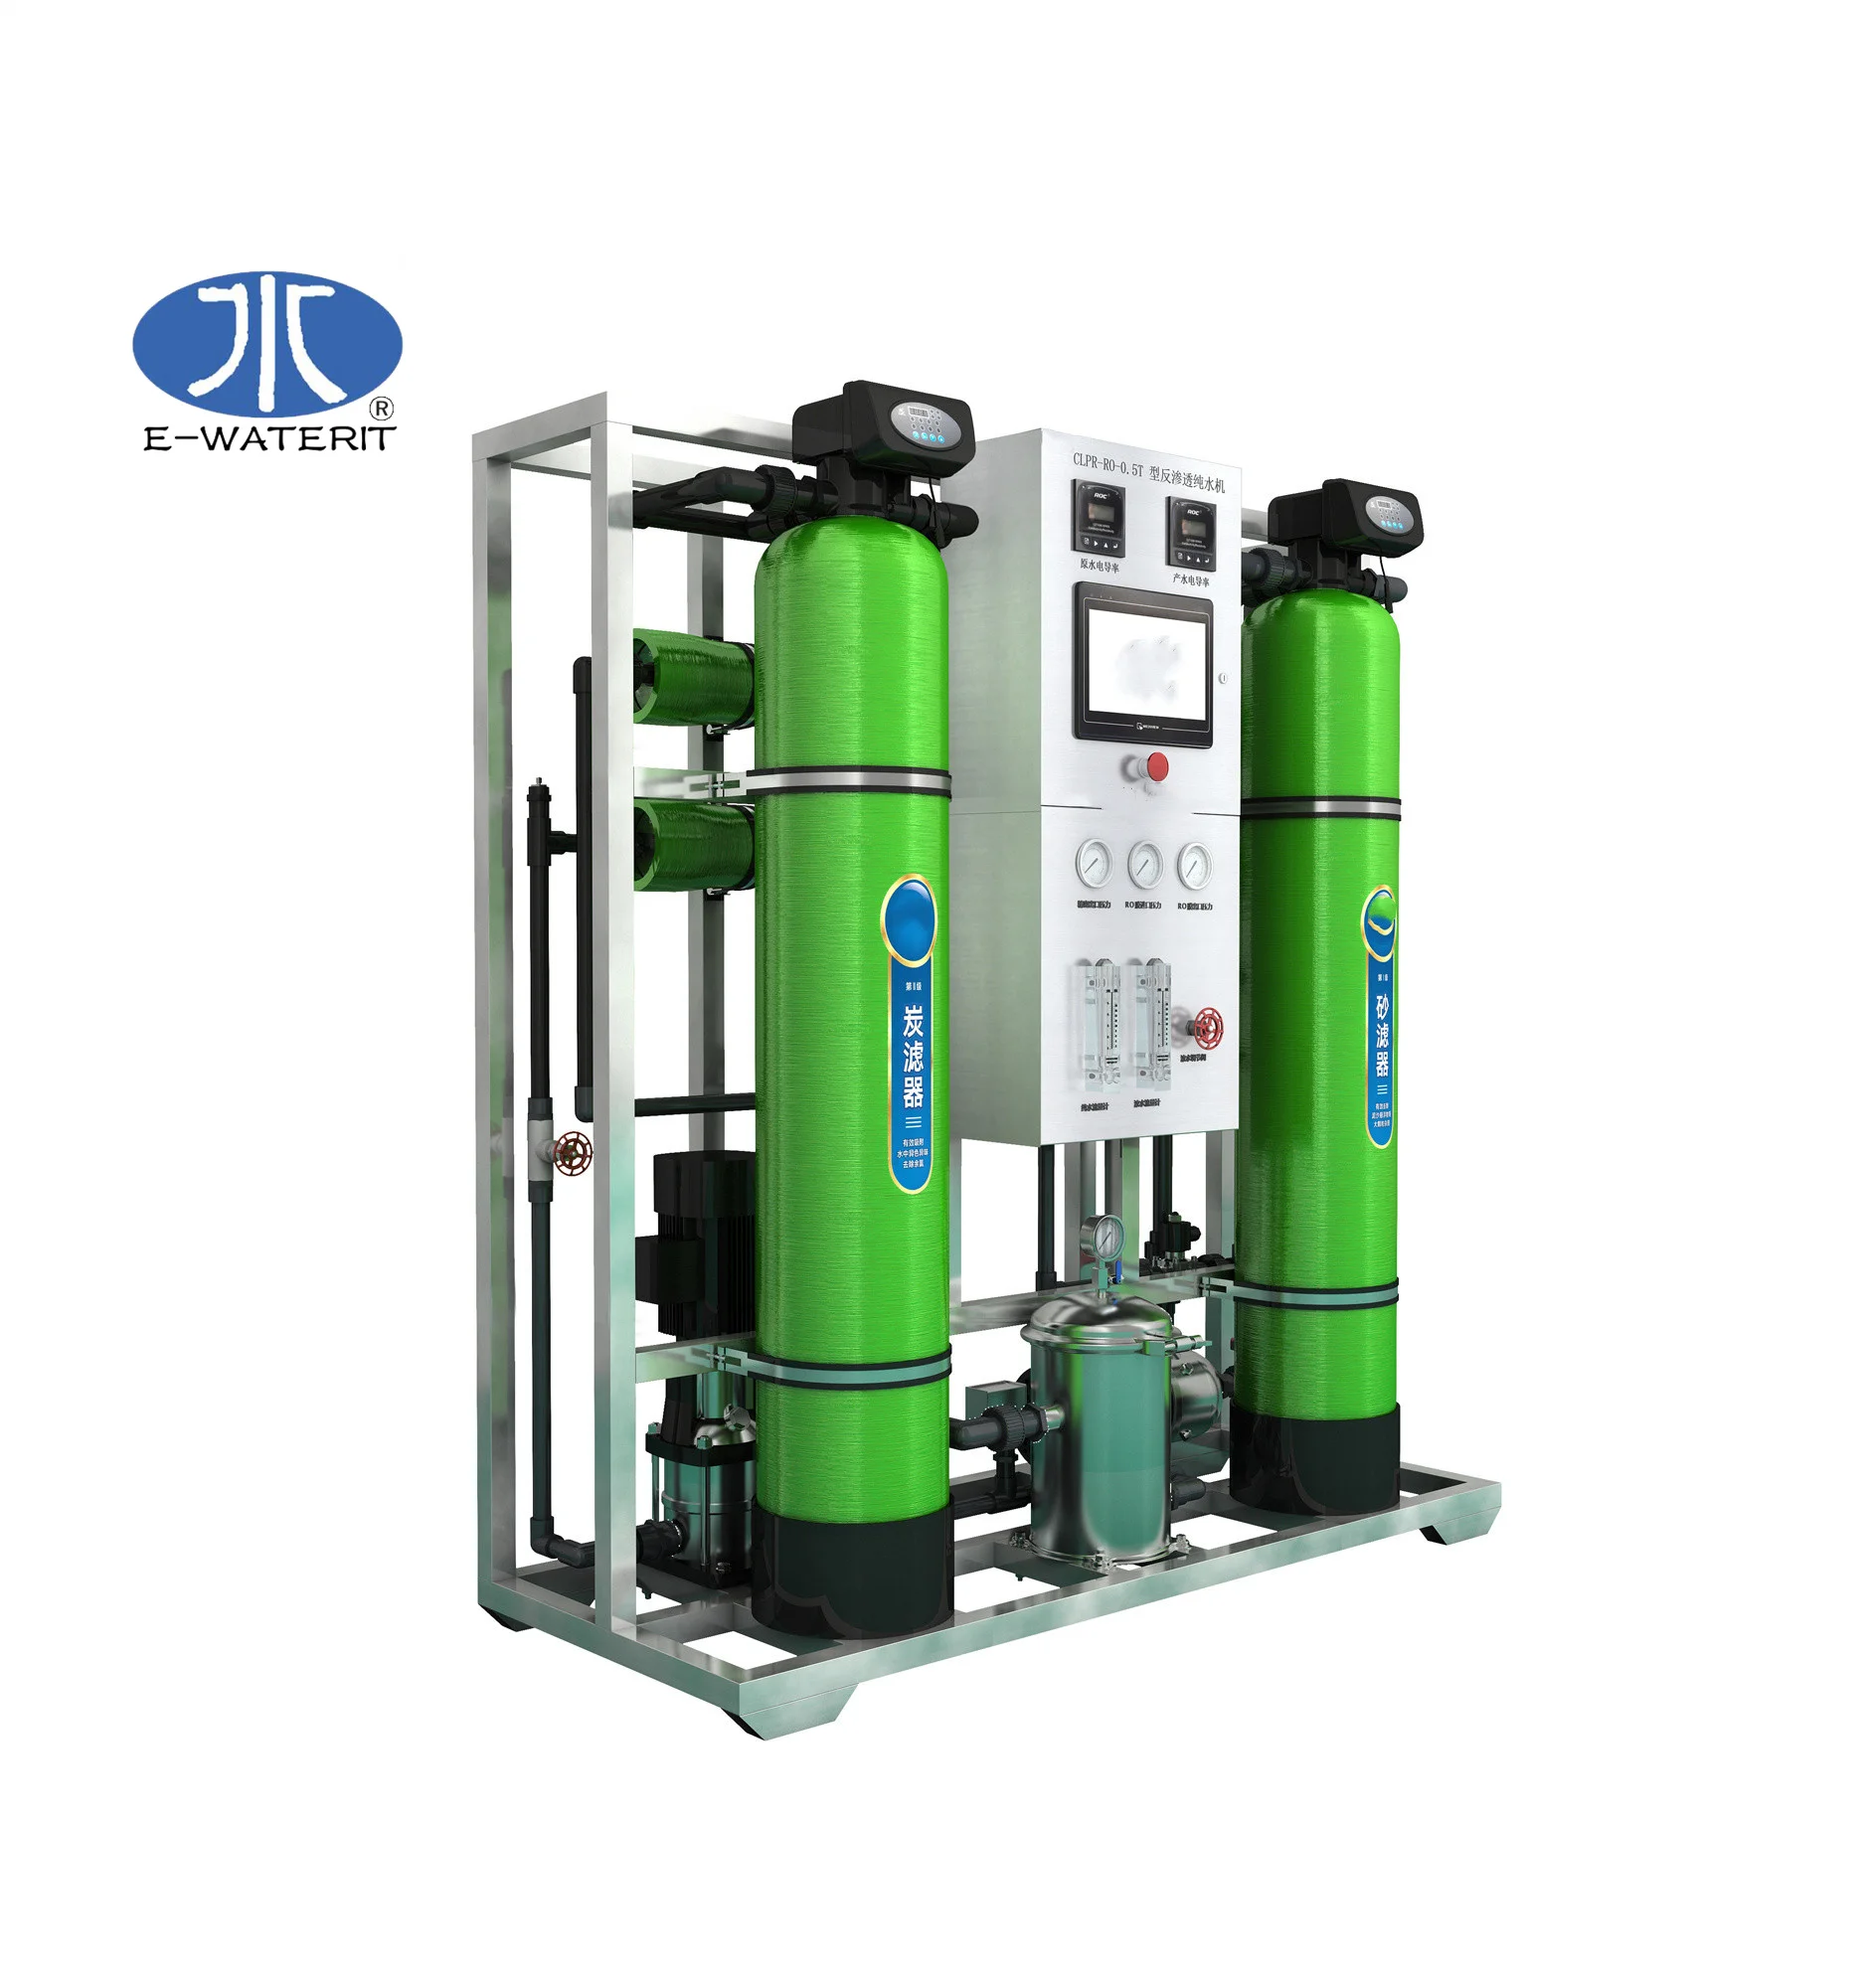 Drinking Water Filtration/Purification RO Deionized Plant Water Purifier Machine Reverse Osmosis Systems